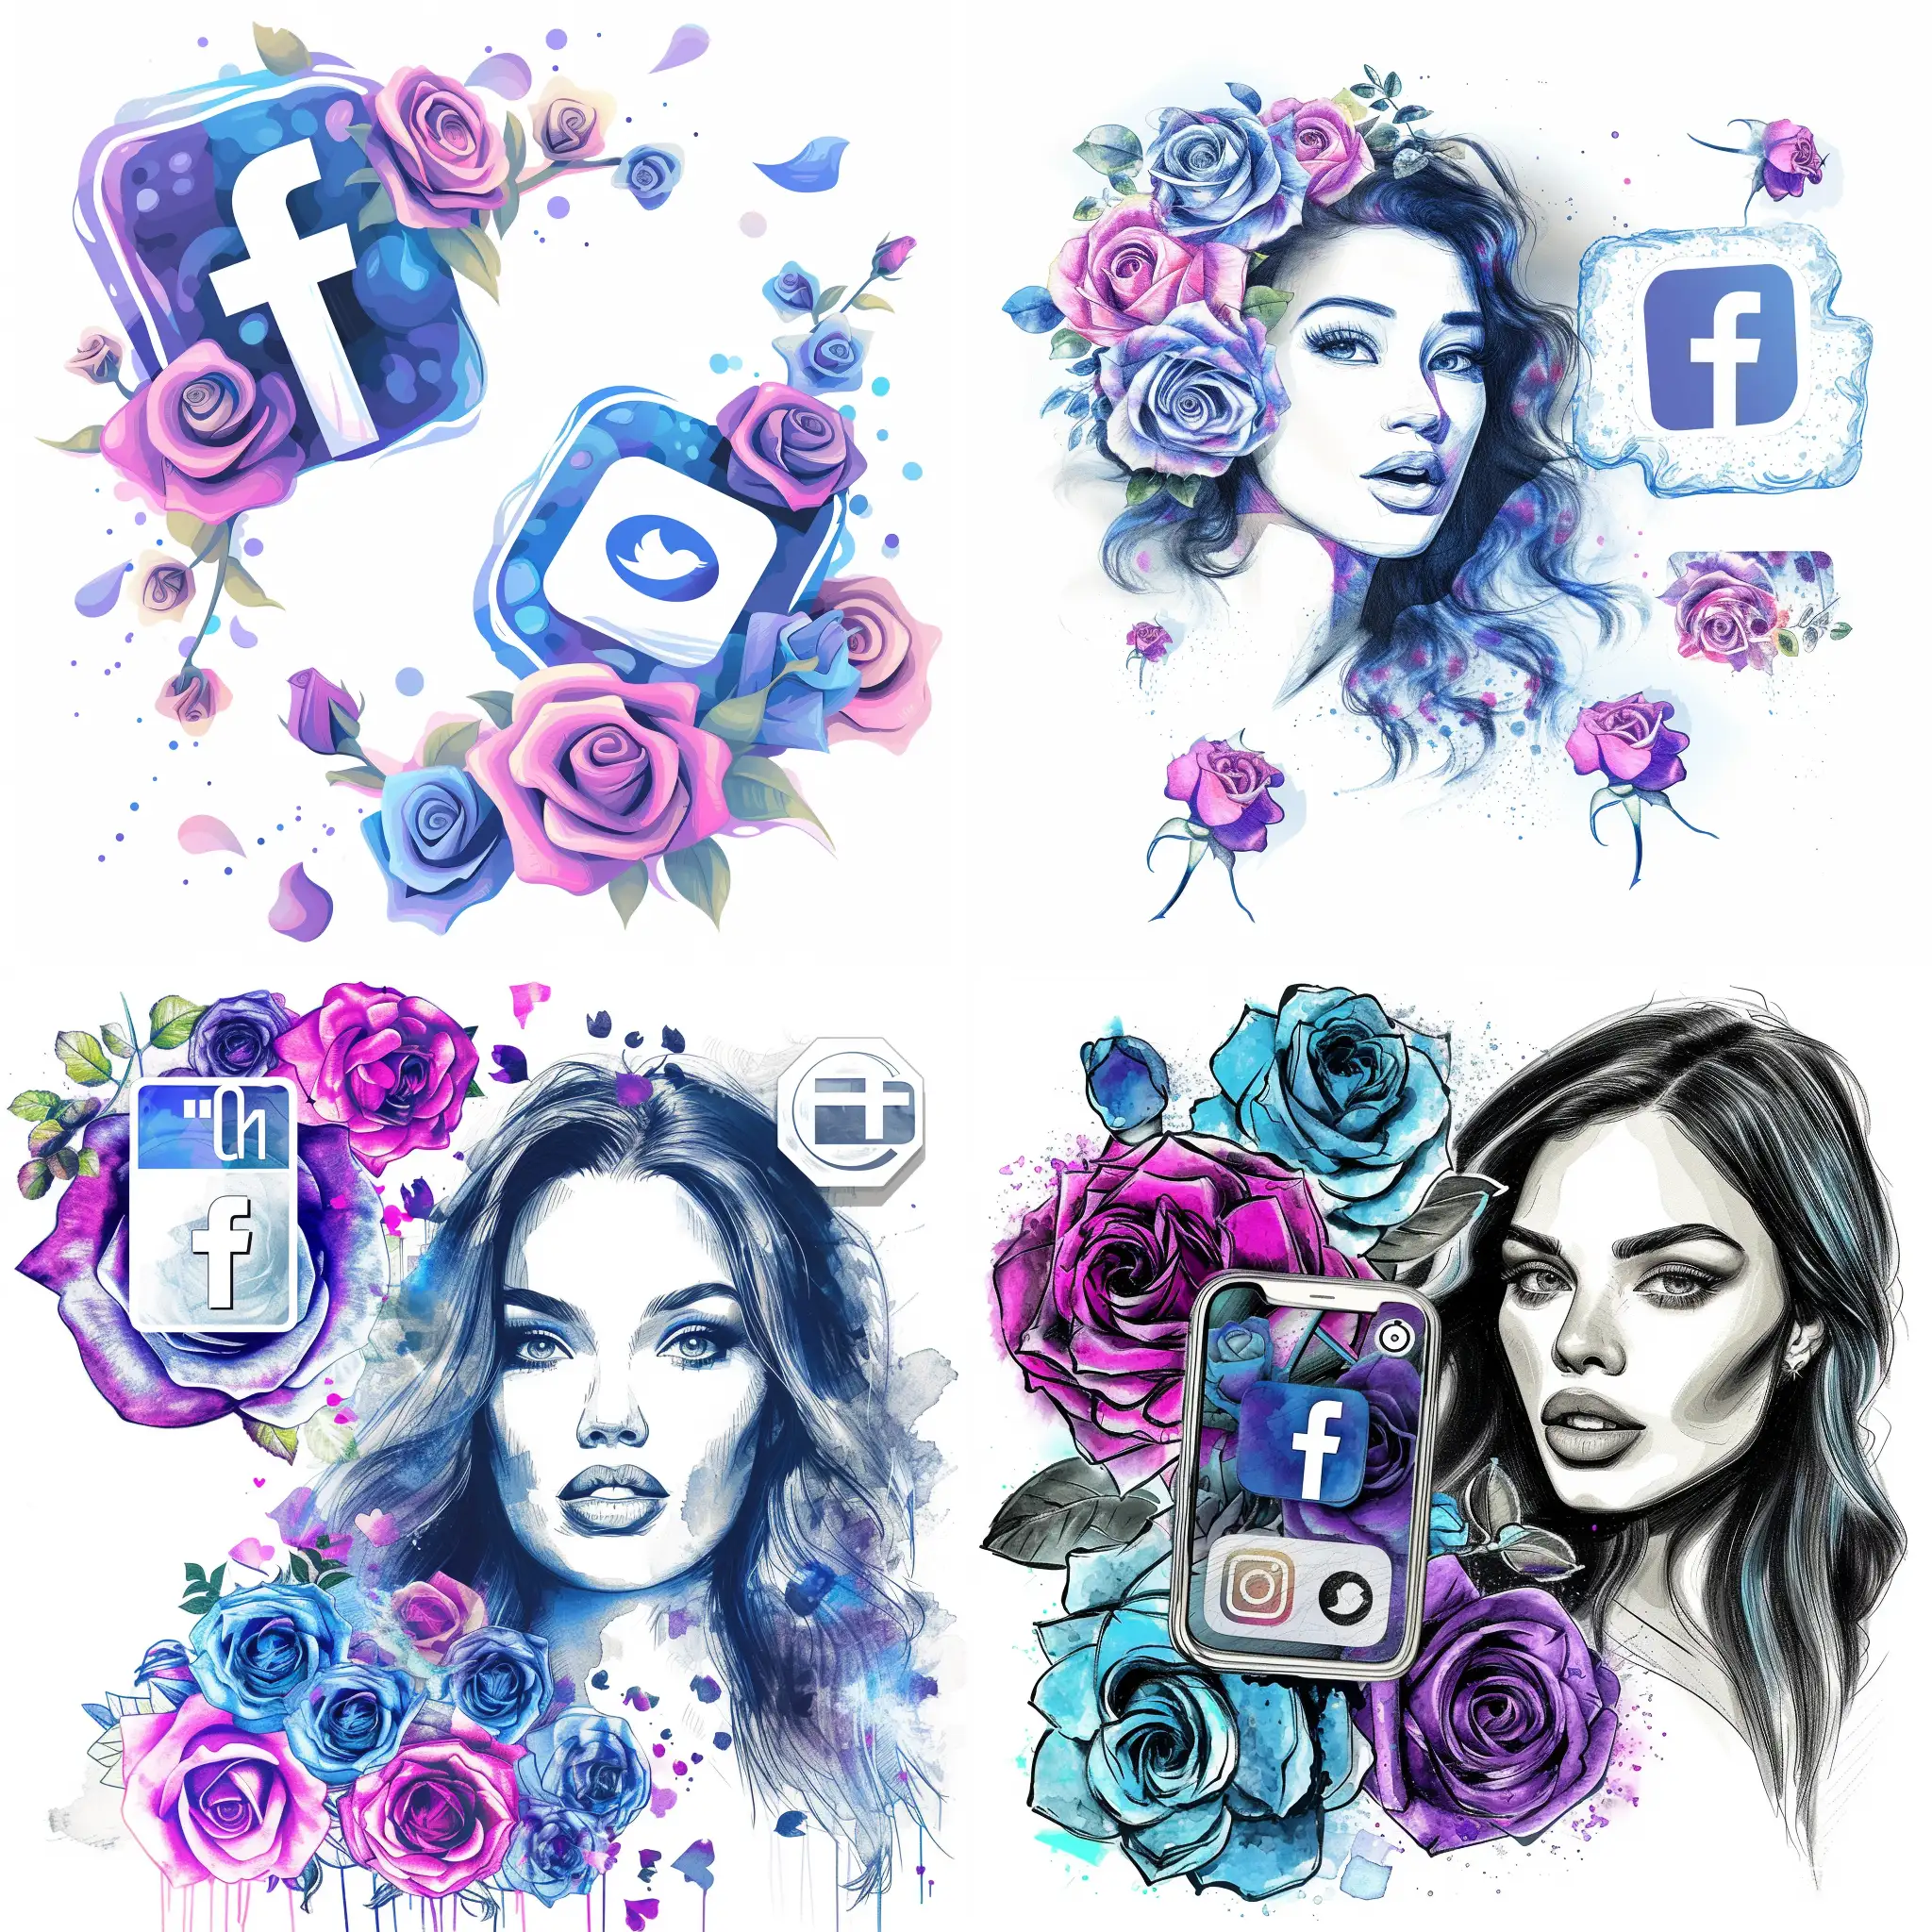 Social-Media-Icons-with-Elegant-Blue-and-Purple-Roses-Sketch